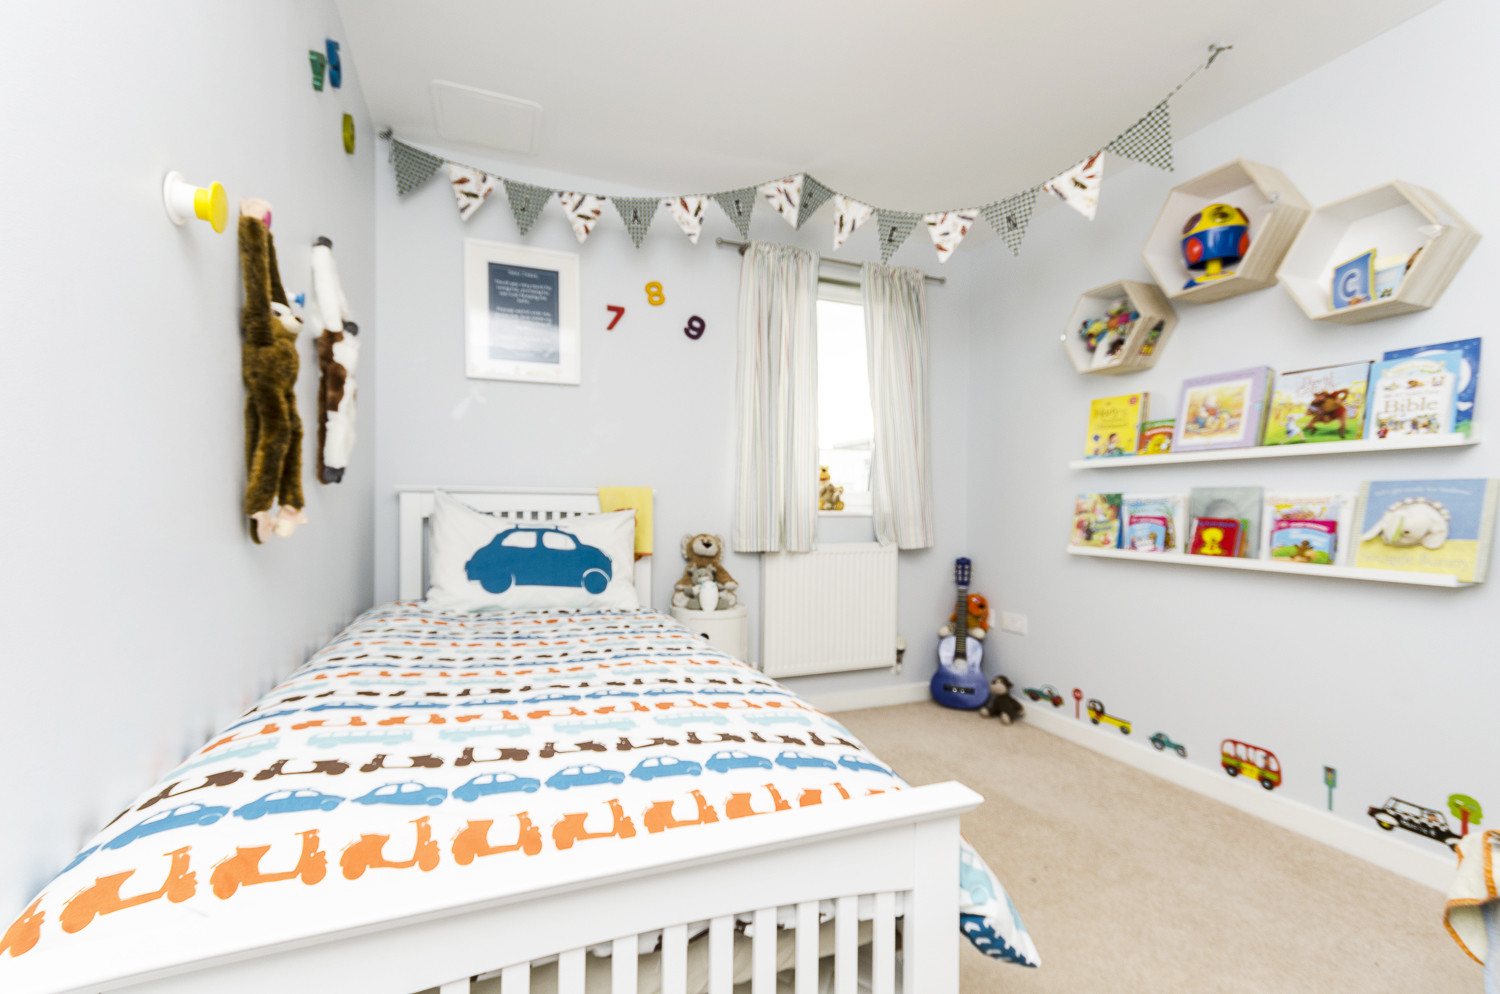 Kids Room Wall Ideas
 27 Stylish Ways to Decorate your Children s Bedroom The